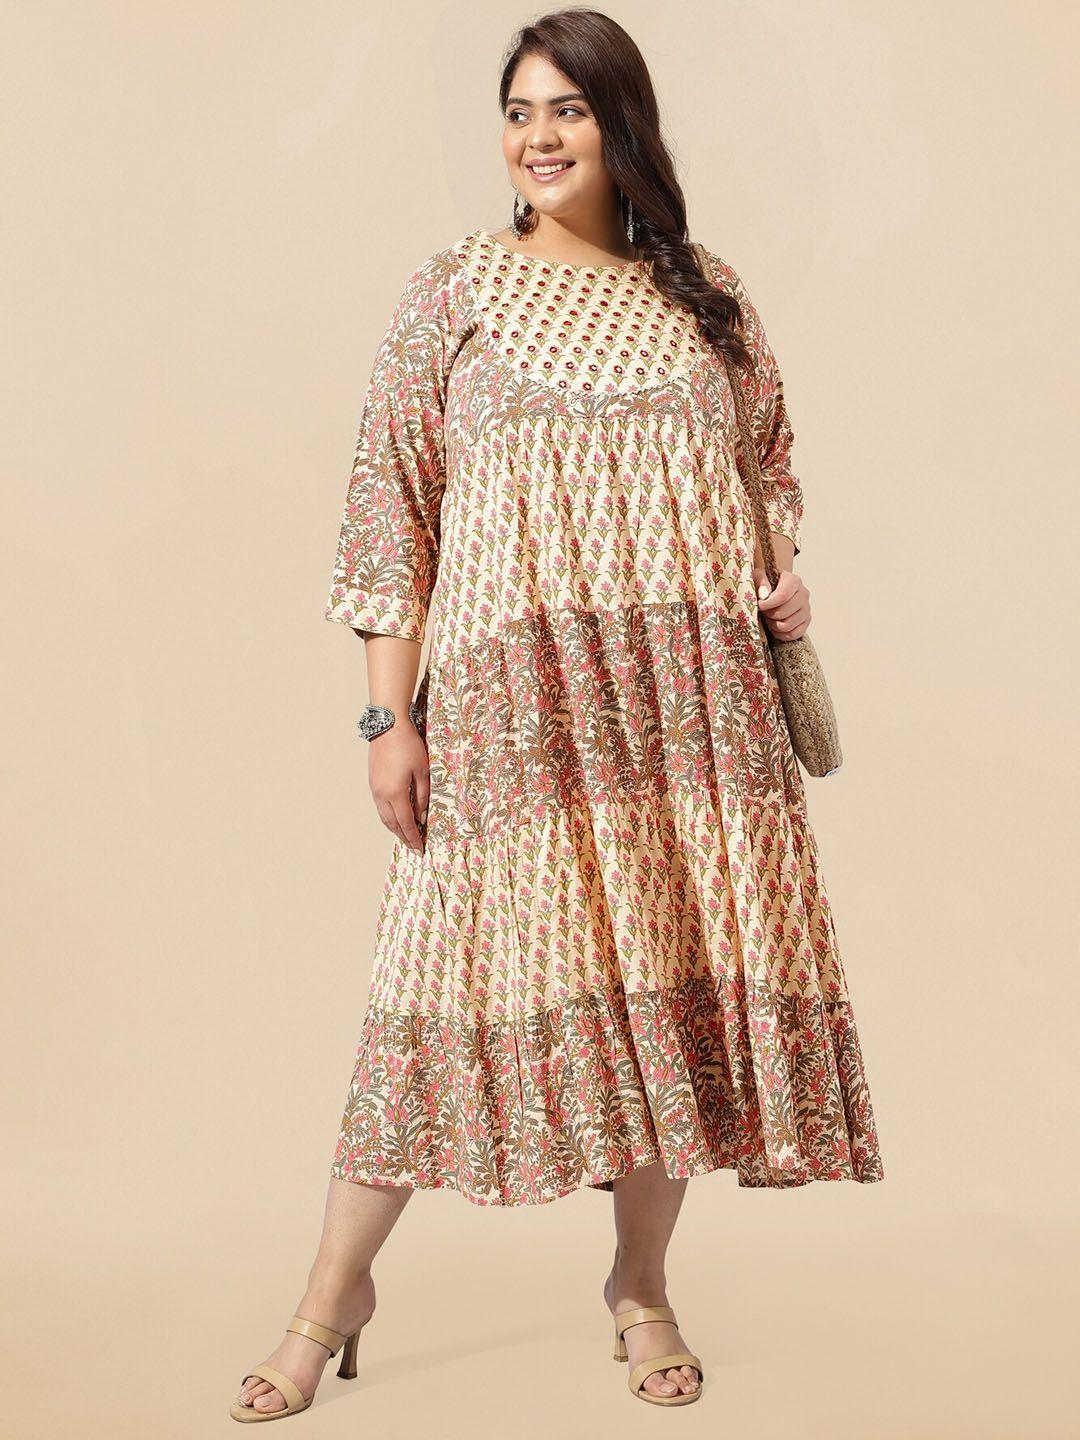 mirchi-fashion-cream-plus-size-floral-printed-embroidered-tiered-empire-ethnic-dress